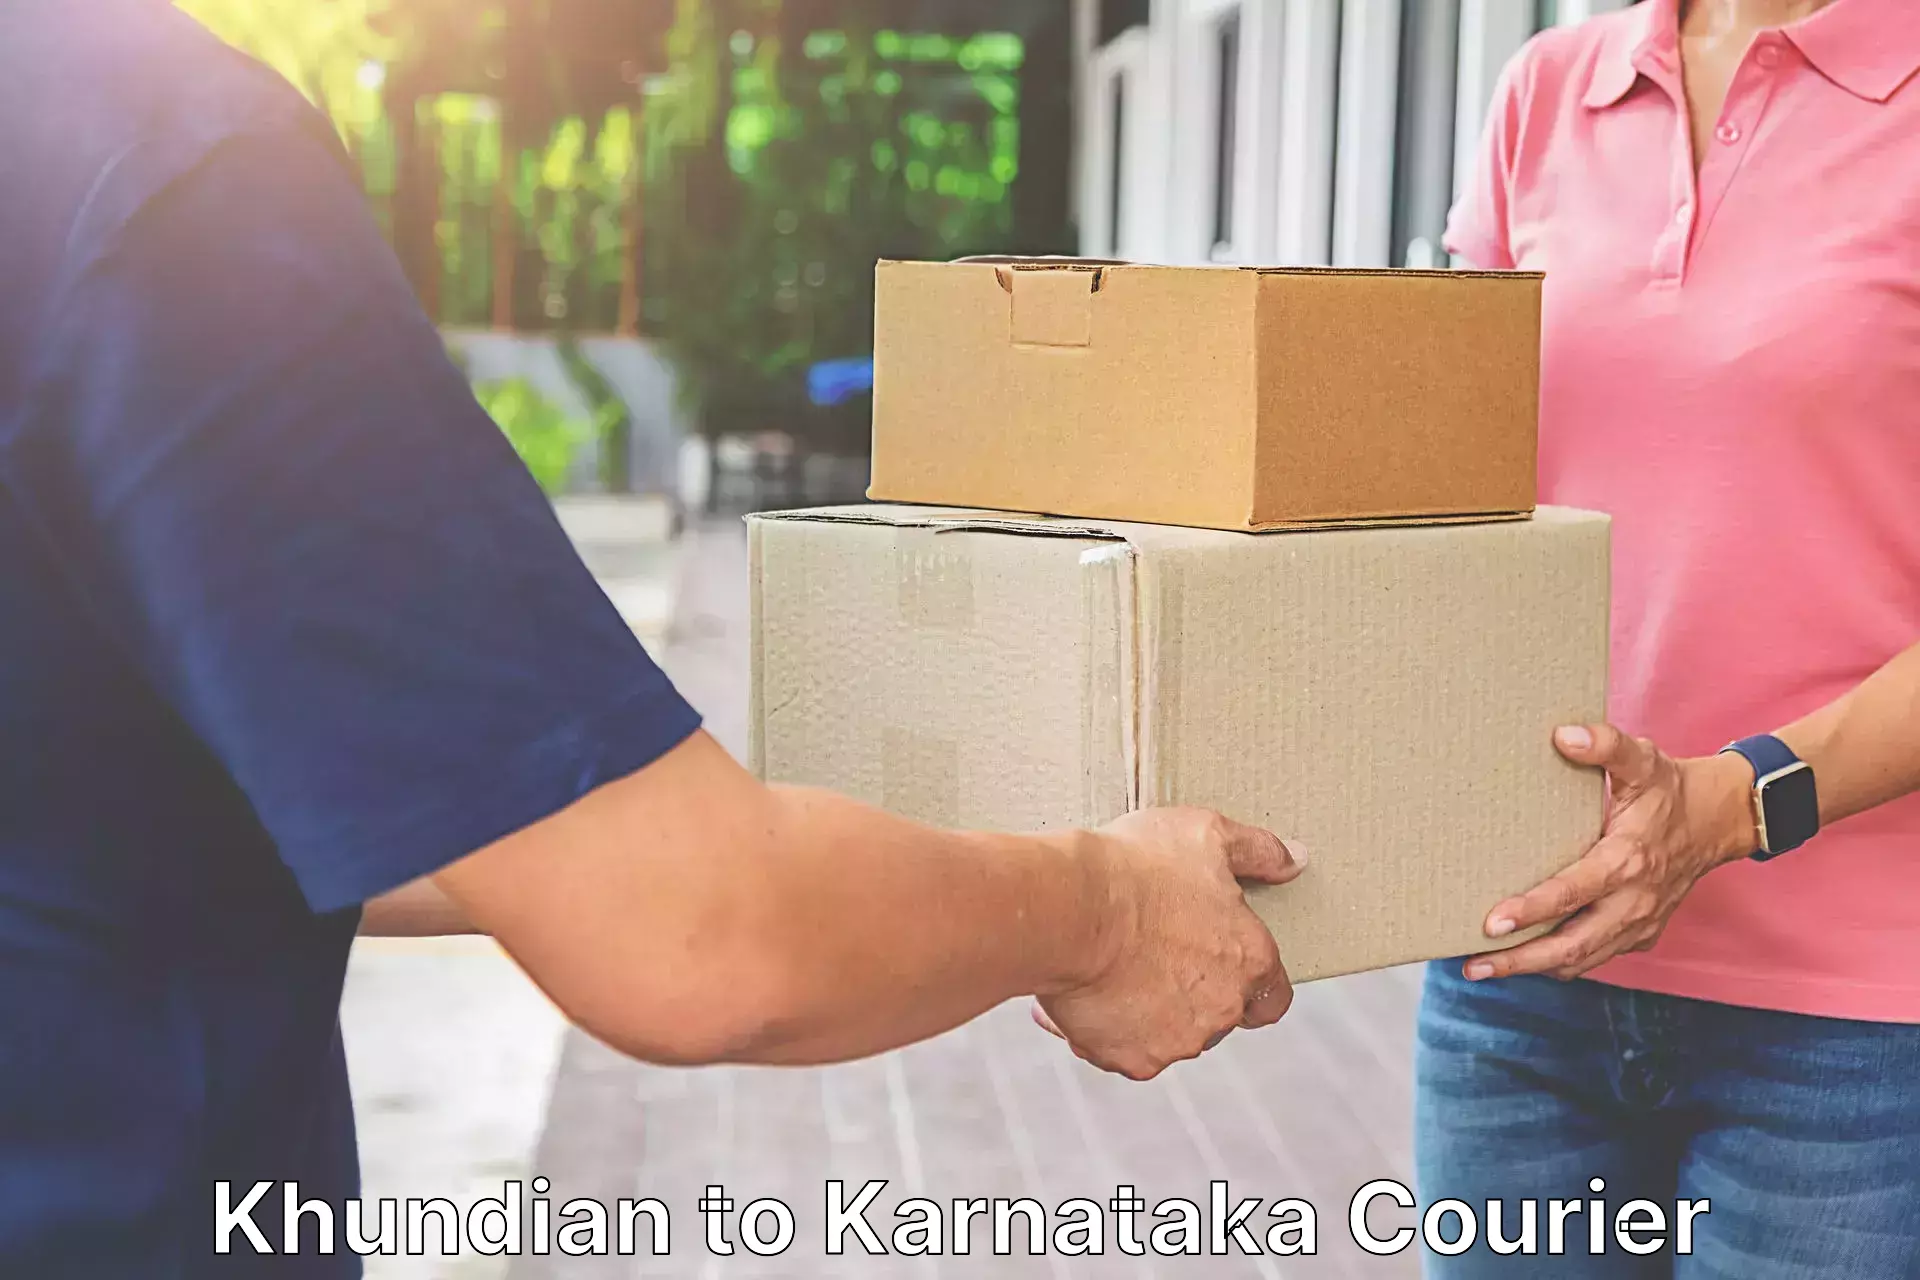 State-of-the-art courier technology Khundian to Ballari